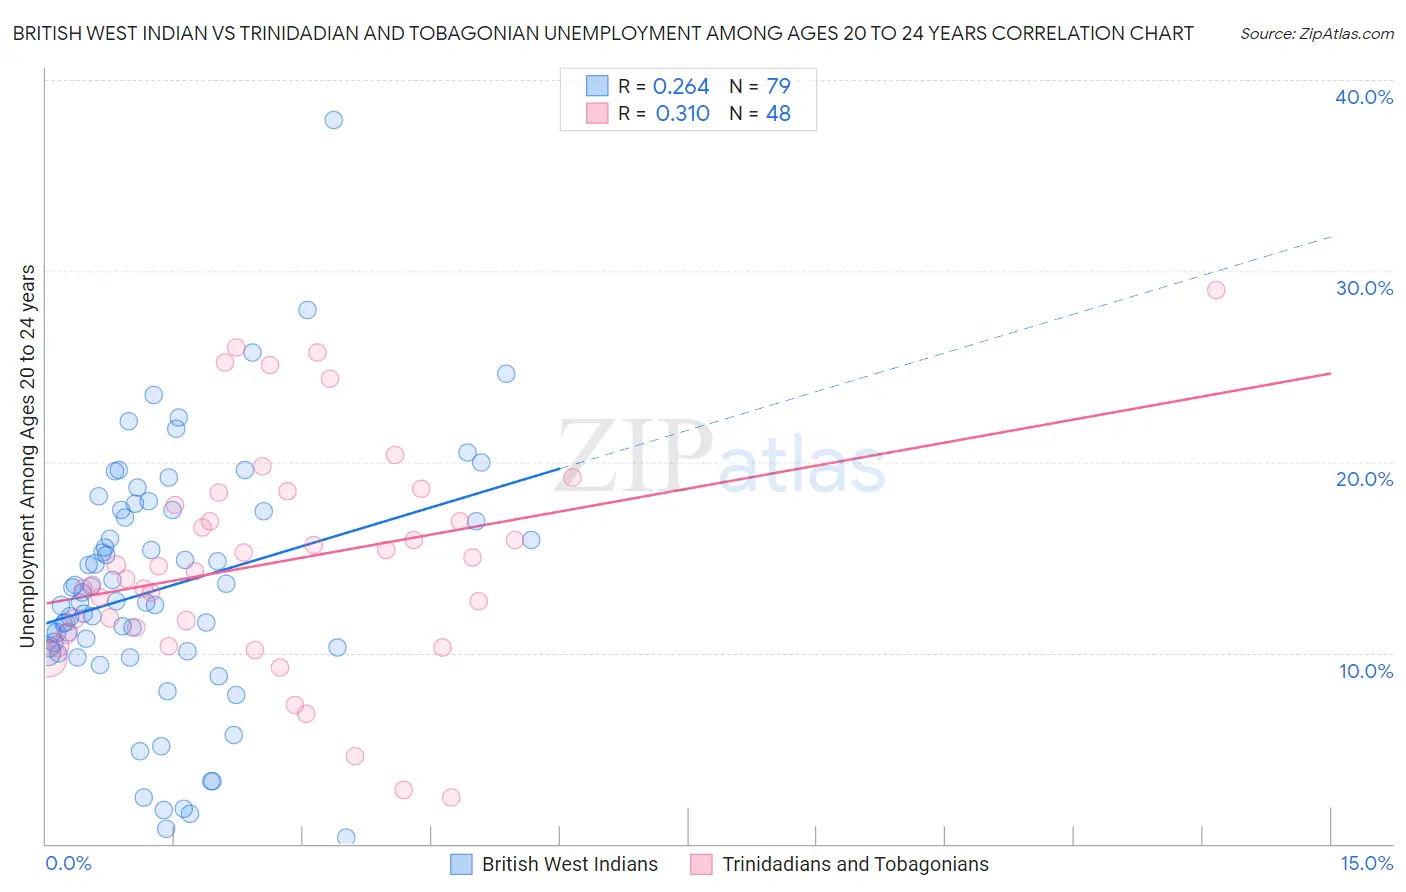 British West Indian vs Trinidadian and Tobagonian Unemployment Among Ages 20 to 24 years